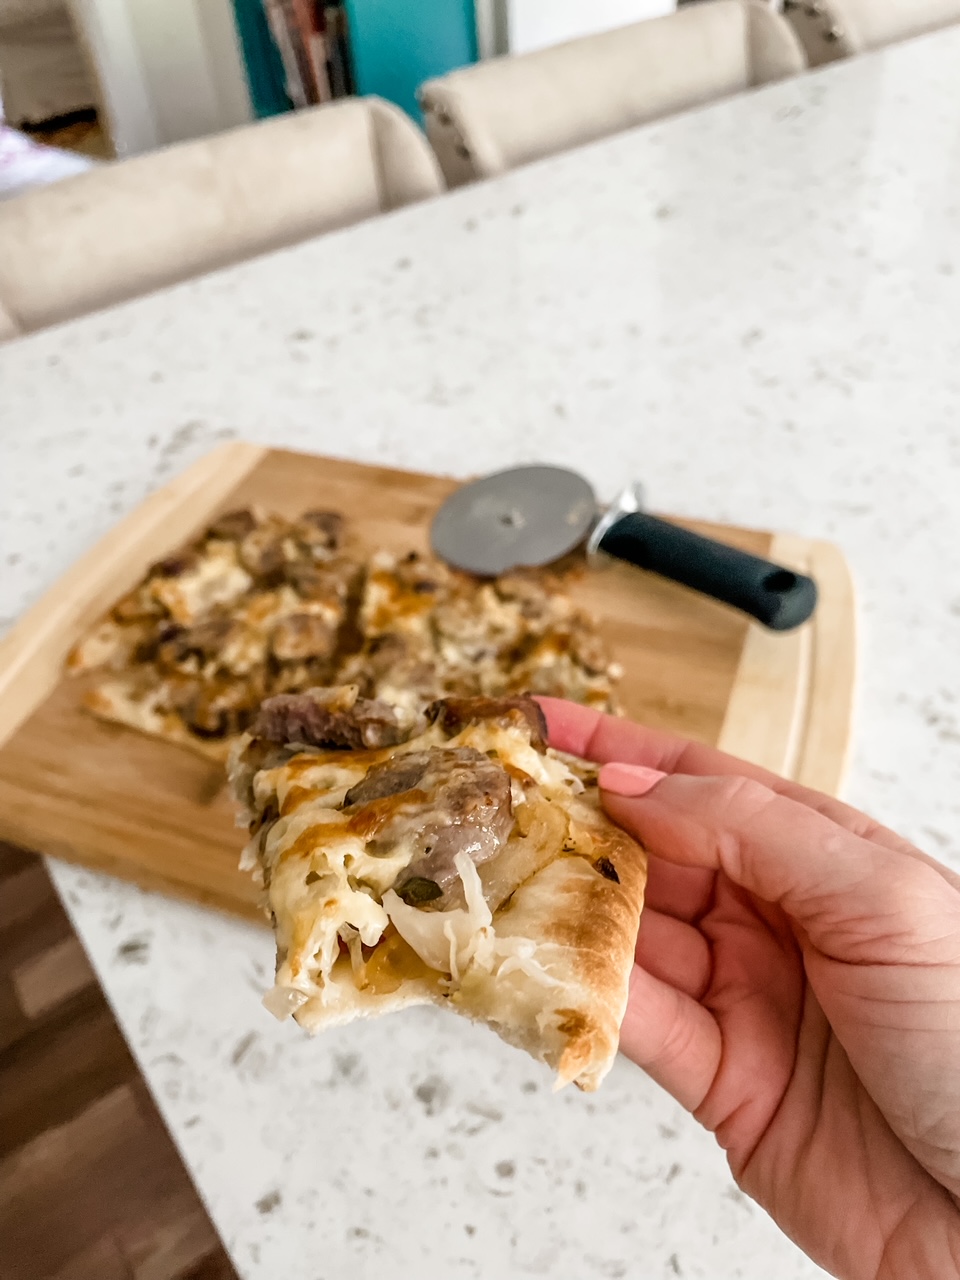 A hand holding up a slice of the Sausage, Sauerkraut and Gouda Flatbread with the rest in the background